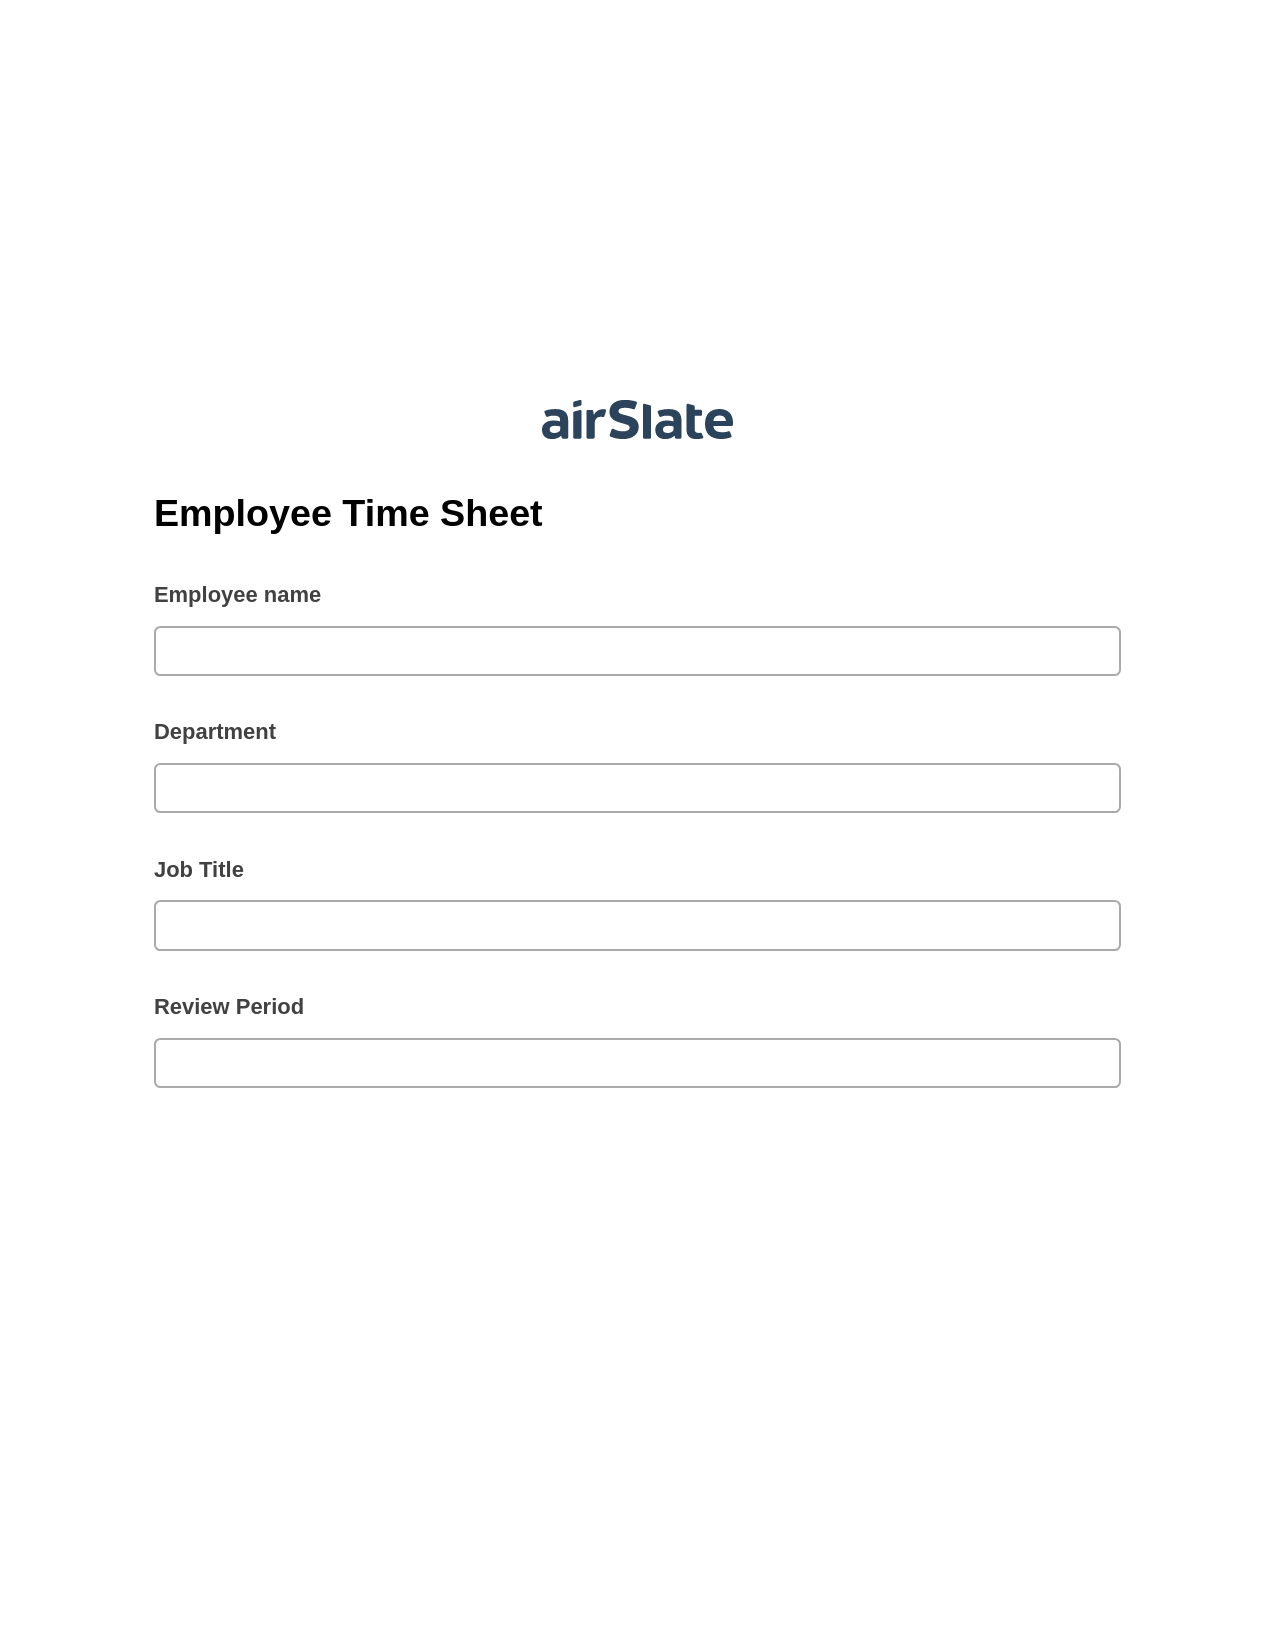 Employee Time Sheet Pre-fill from CSV File Bot, Create slate addon, Export to NetSuite Bot